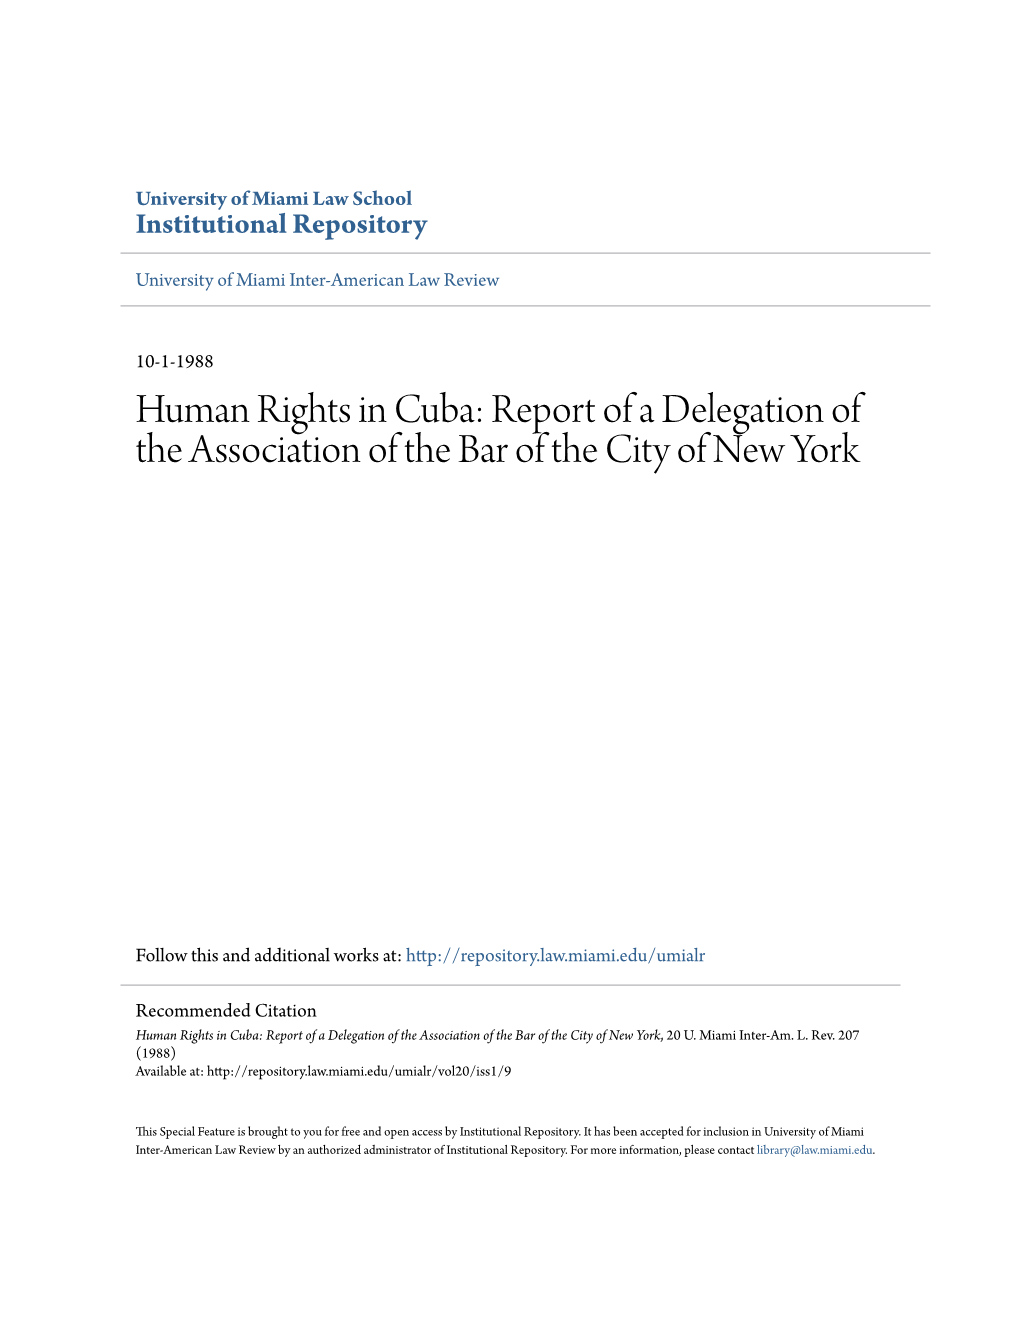 Human Rights in Cuba: Report of a Delegation of the Association of the Bar of the City of New York